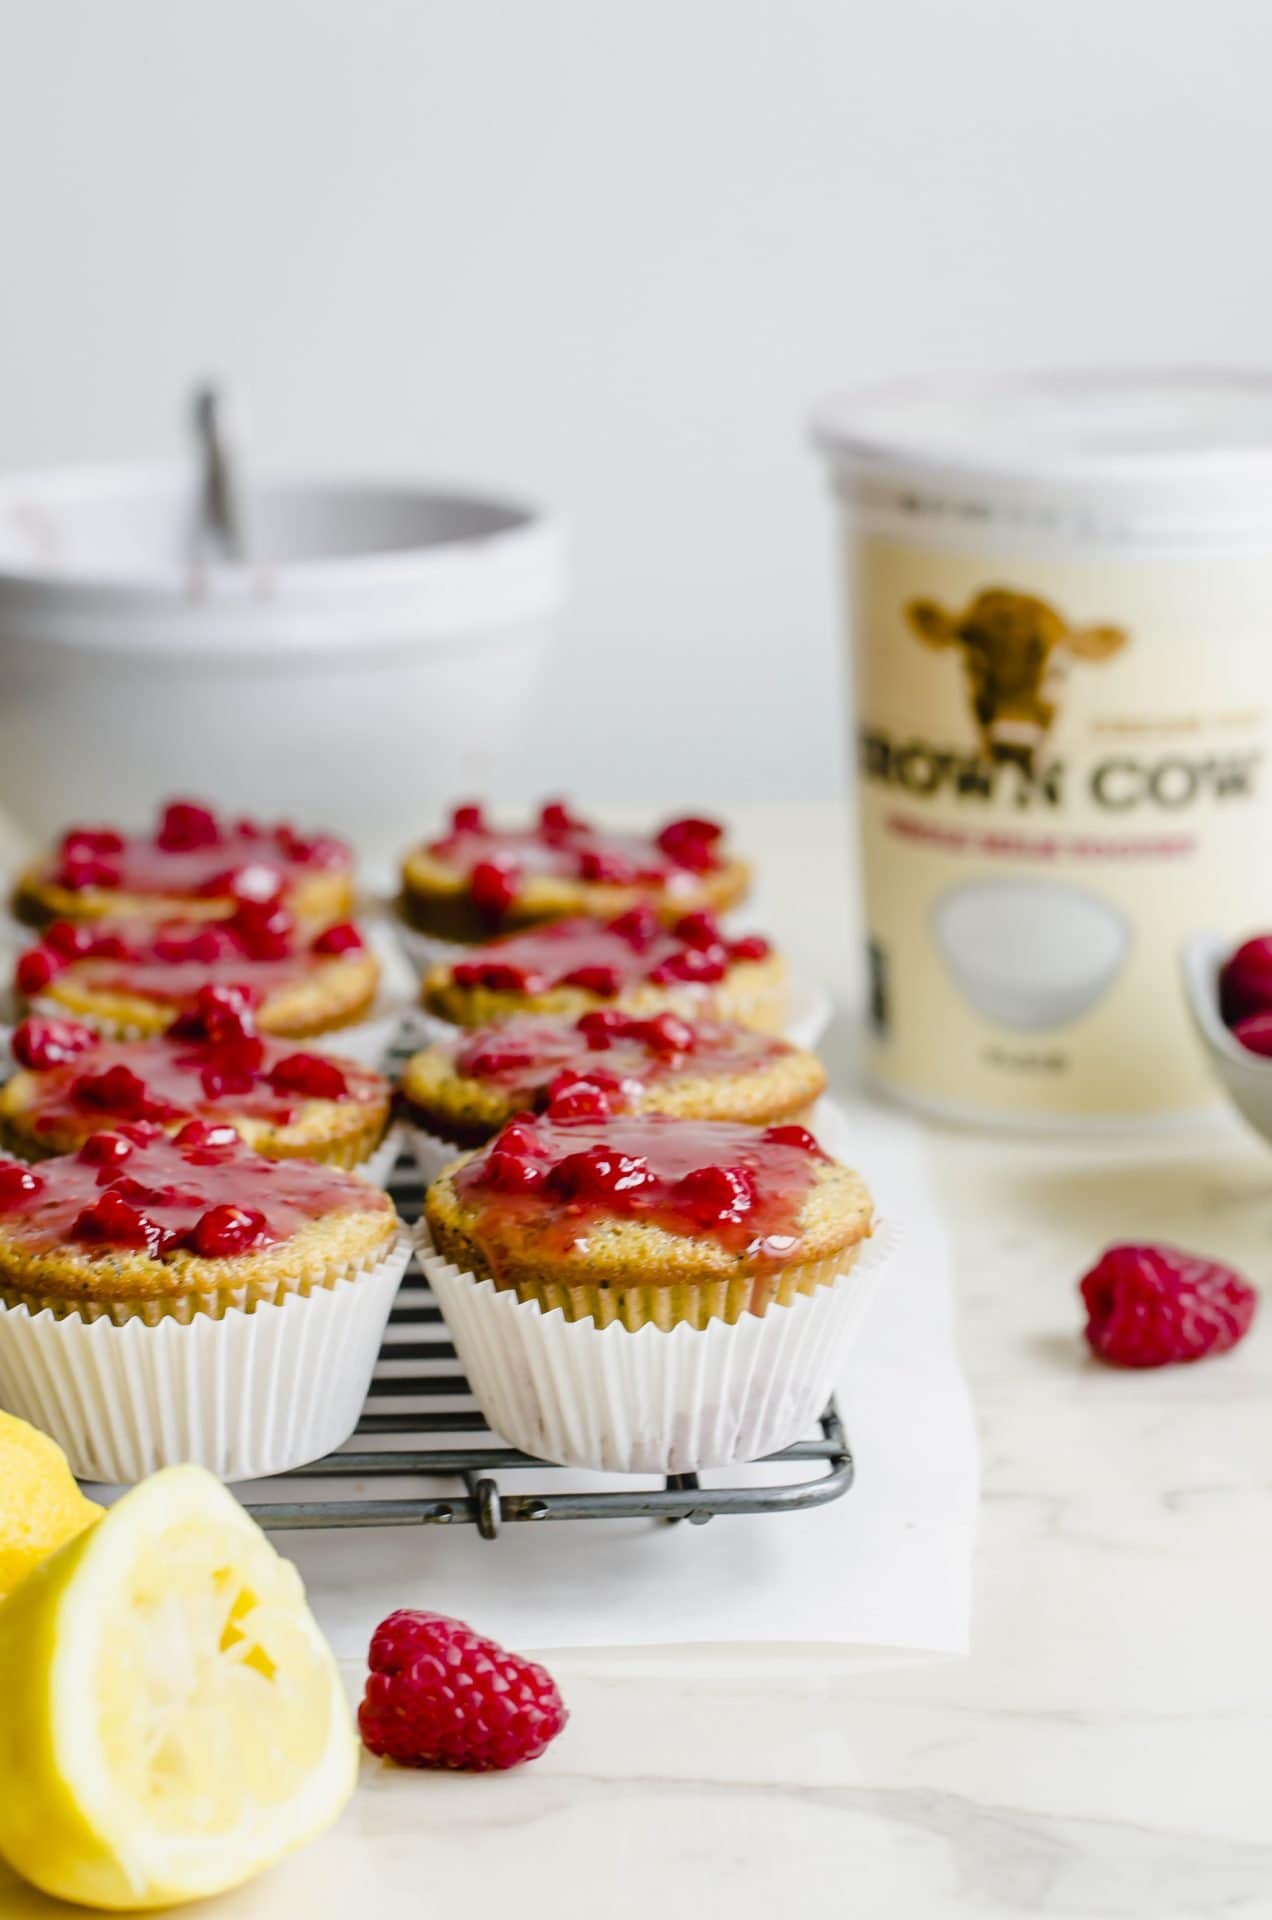 Glazed lemon poppyssed muffins on a wire rack with a container of yogurt in the background.